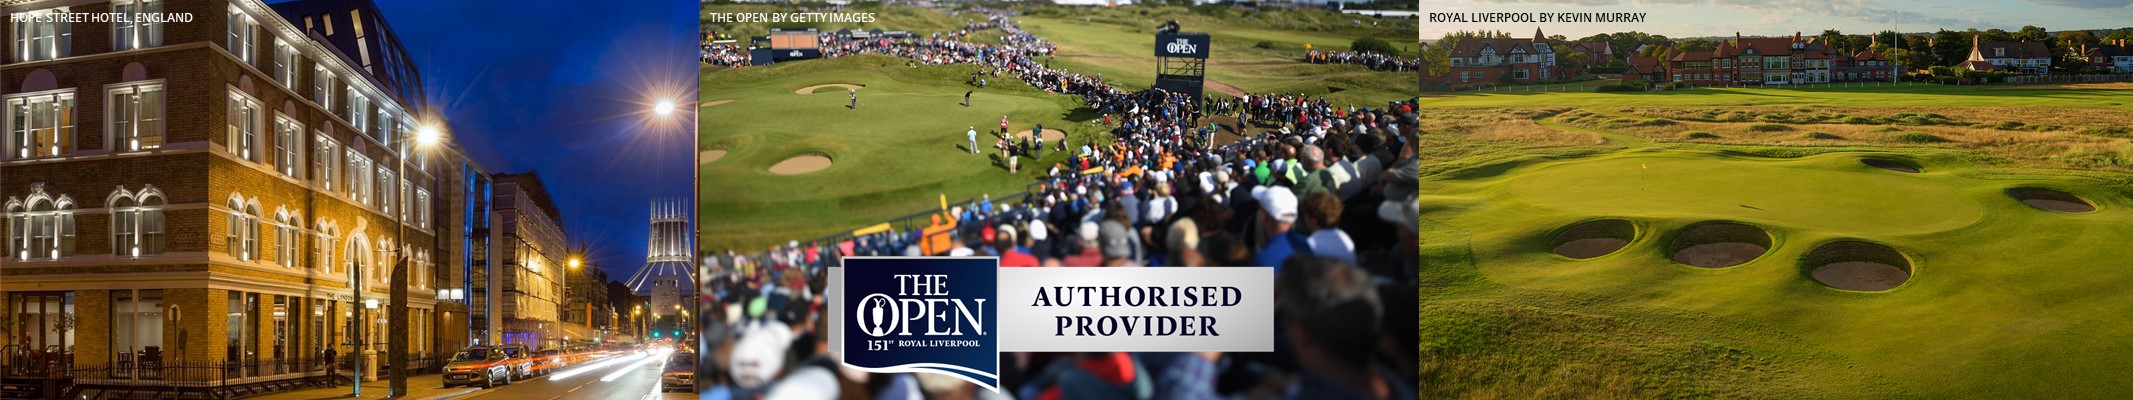 Escorted Golf Vacation Scotland and England and Attend The 151st Open at Royal Liverpool